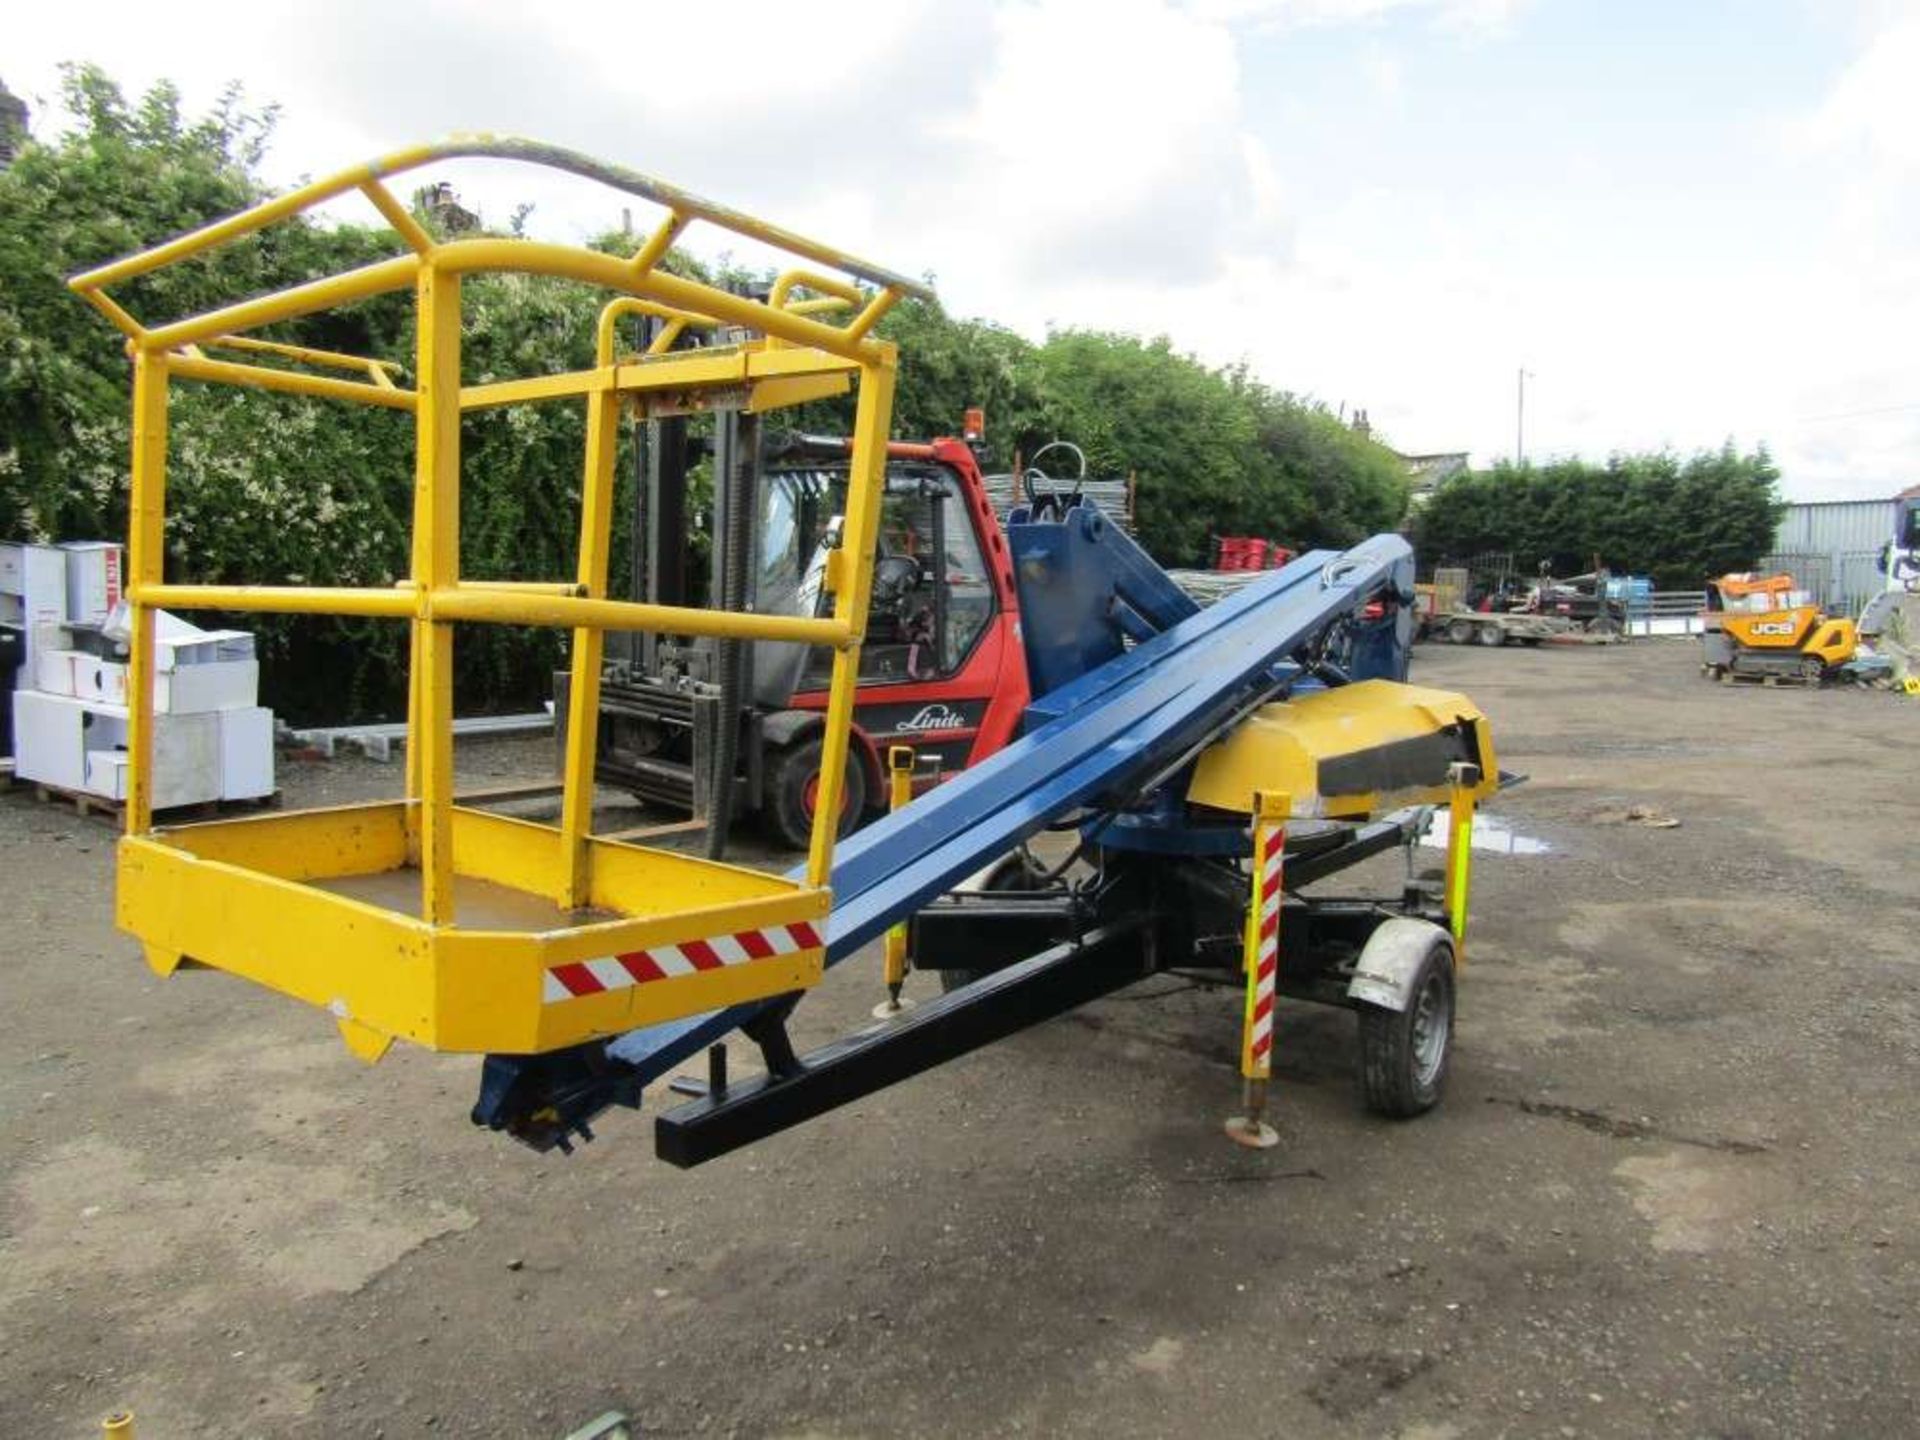 Access Machines Ltd Trailer Mounted Telescopic 12 mtr / 40ft Cherry Picker - Image 3 of 5